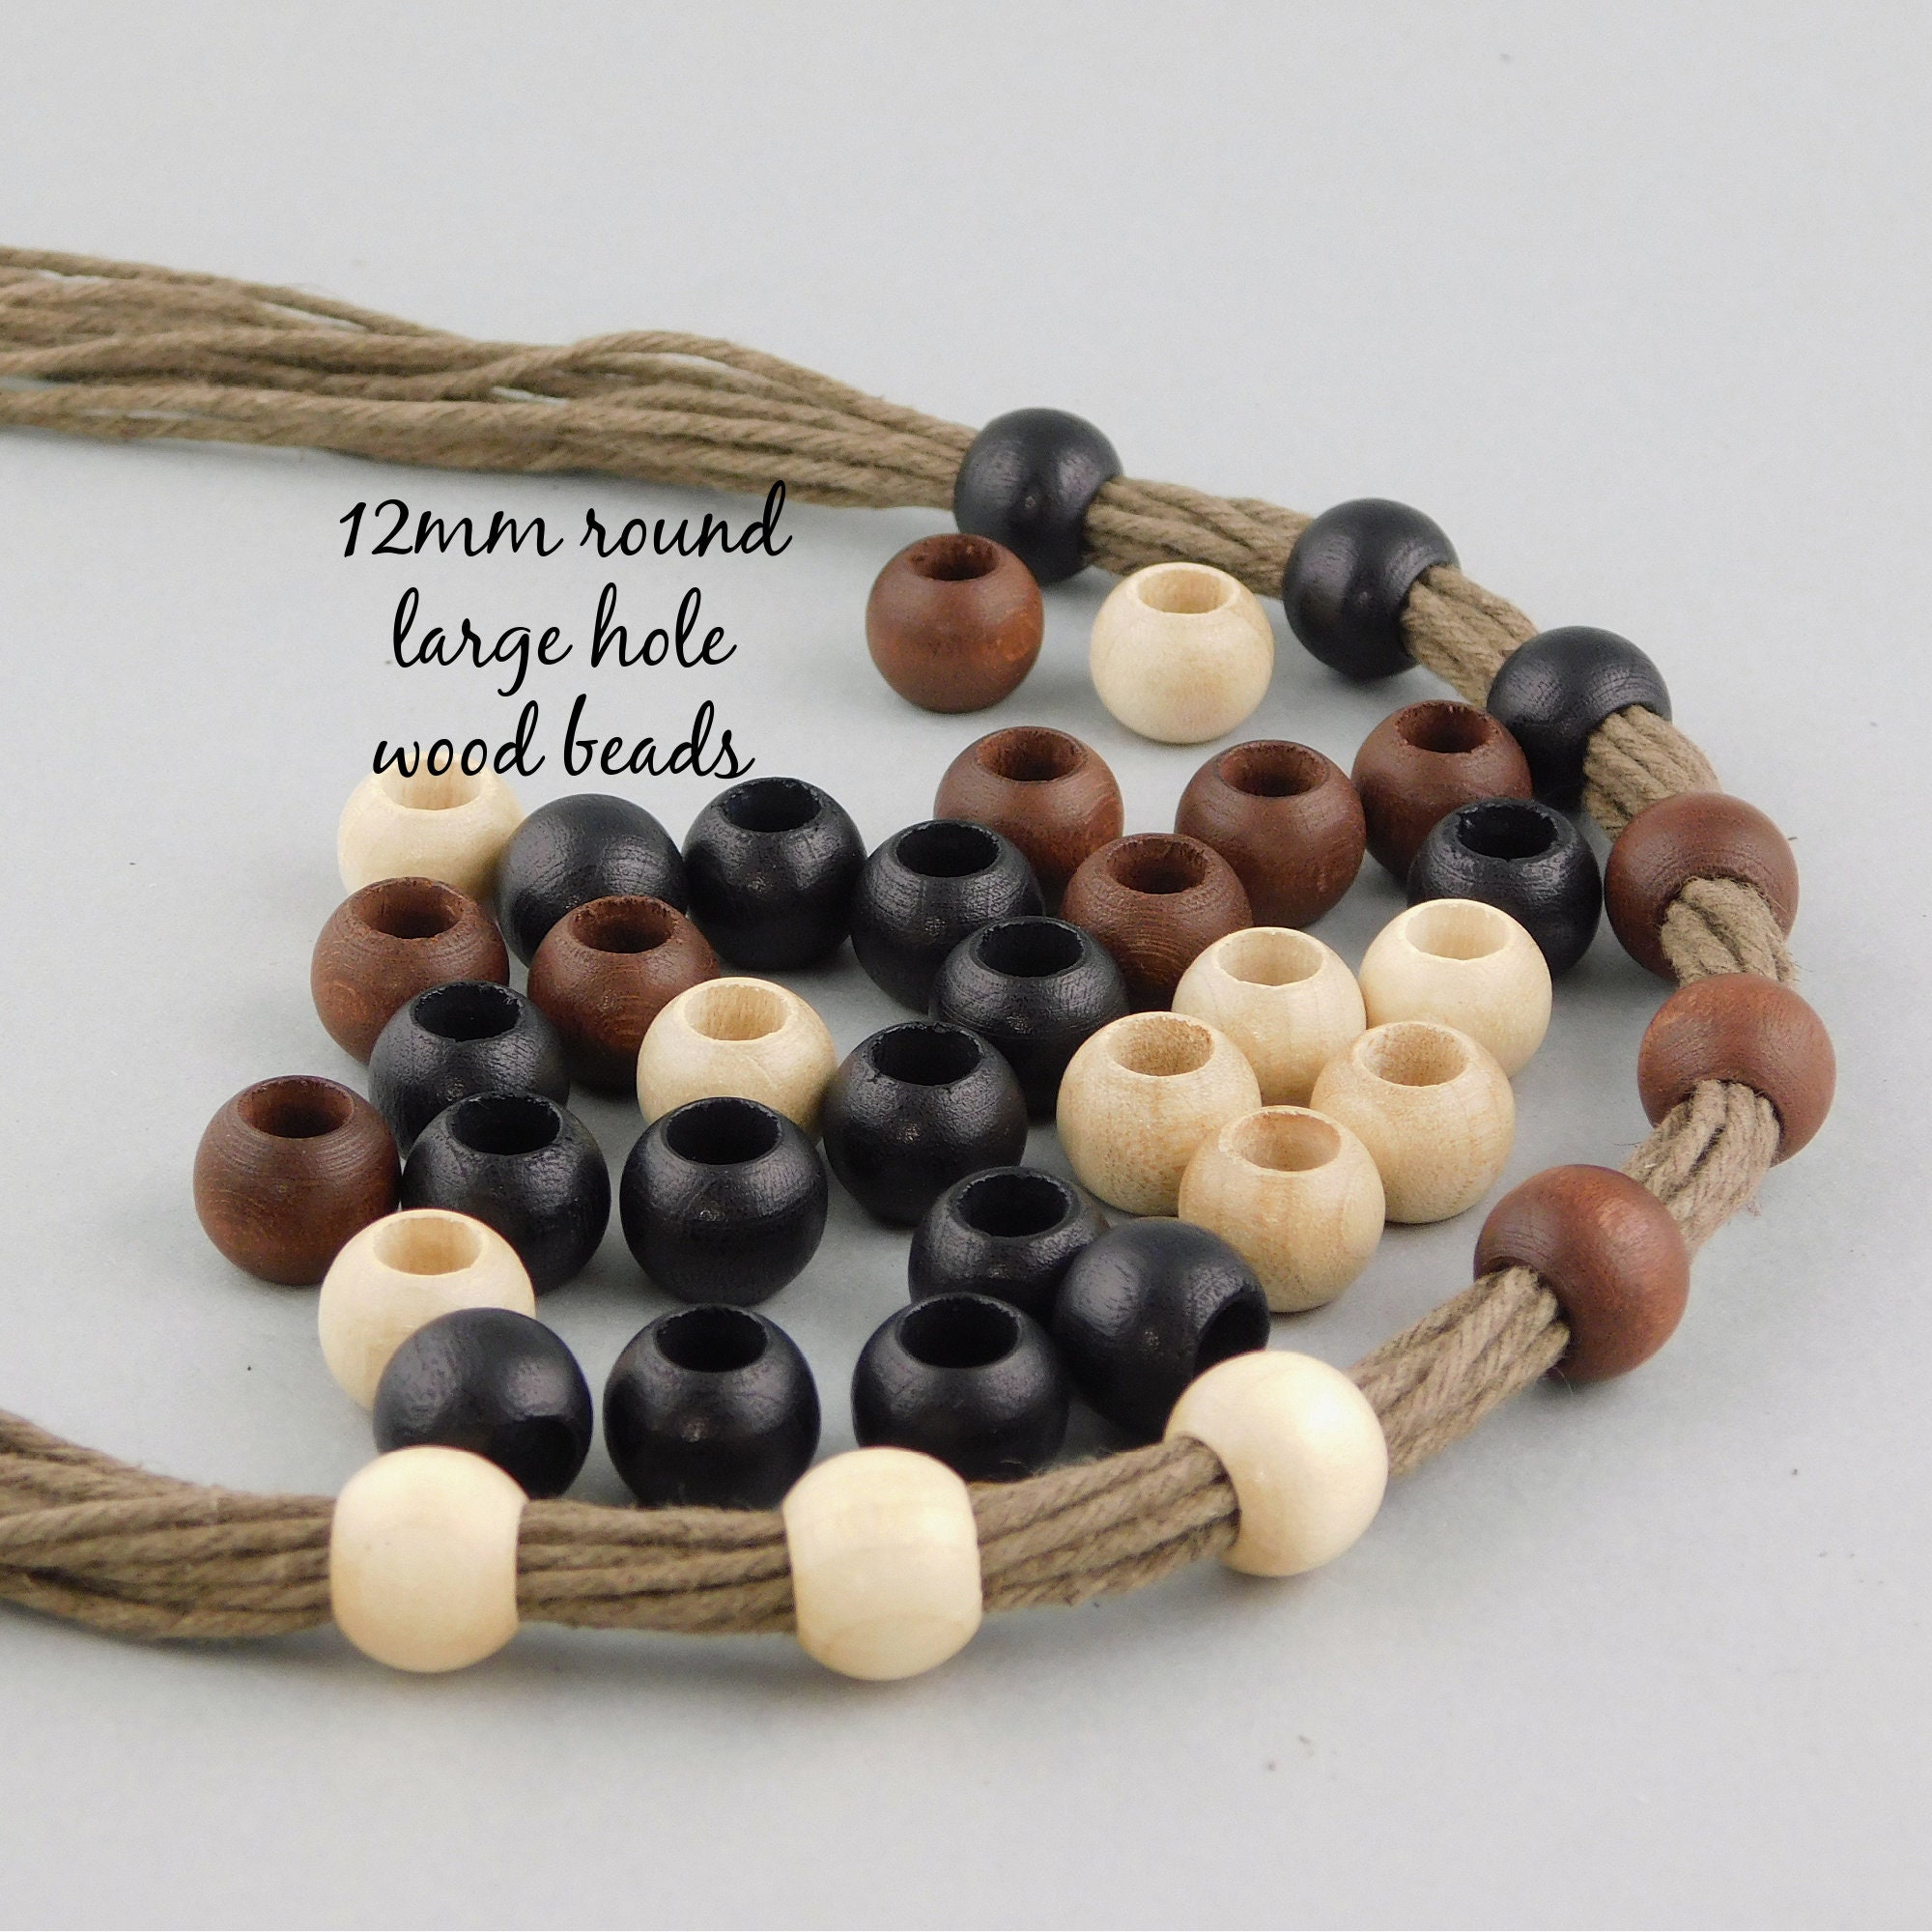 Natural Wood Large Hole Wooden Beads For Macrame Jewelry Charms Crafts  6-25mm 1